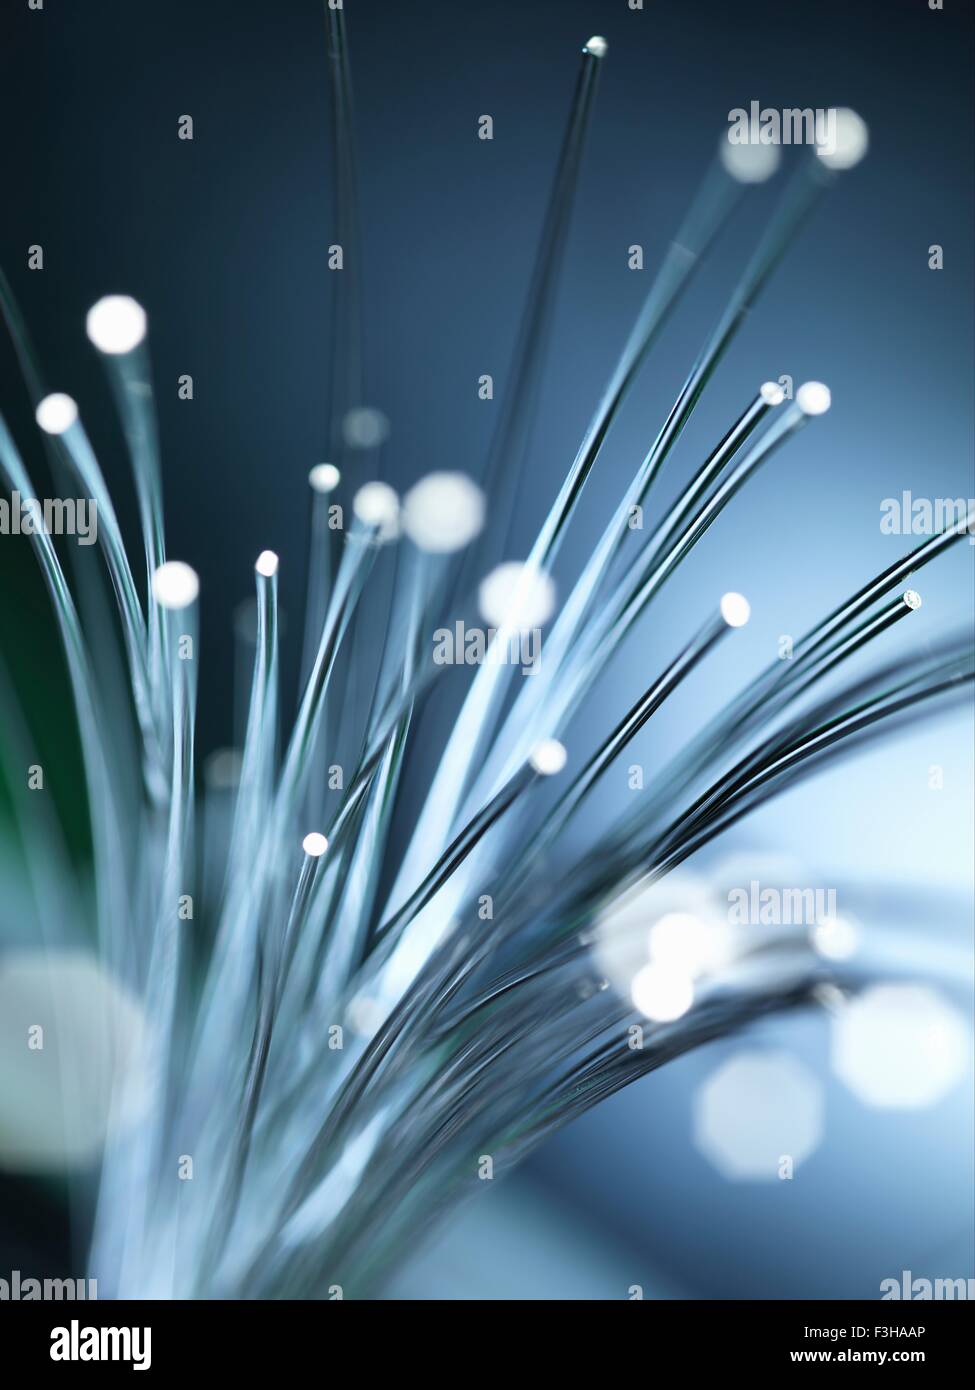 Bundles of illuminated optical fibres used to carry high volumes of data Stock Photo